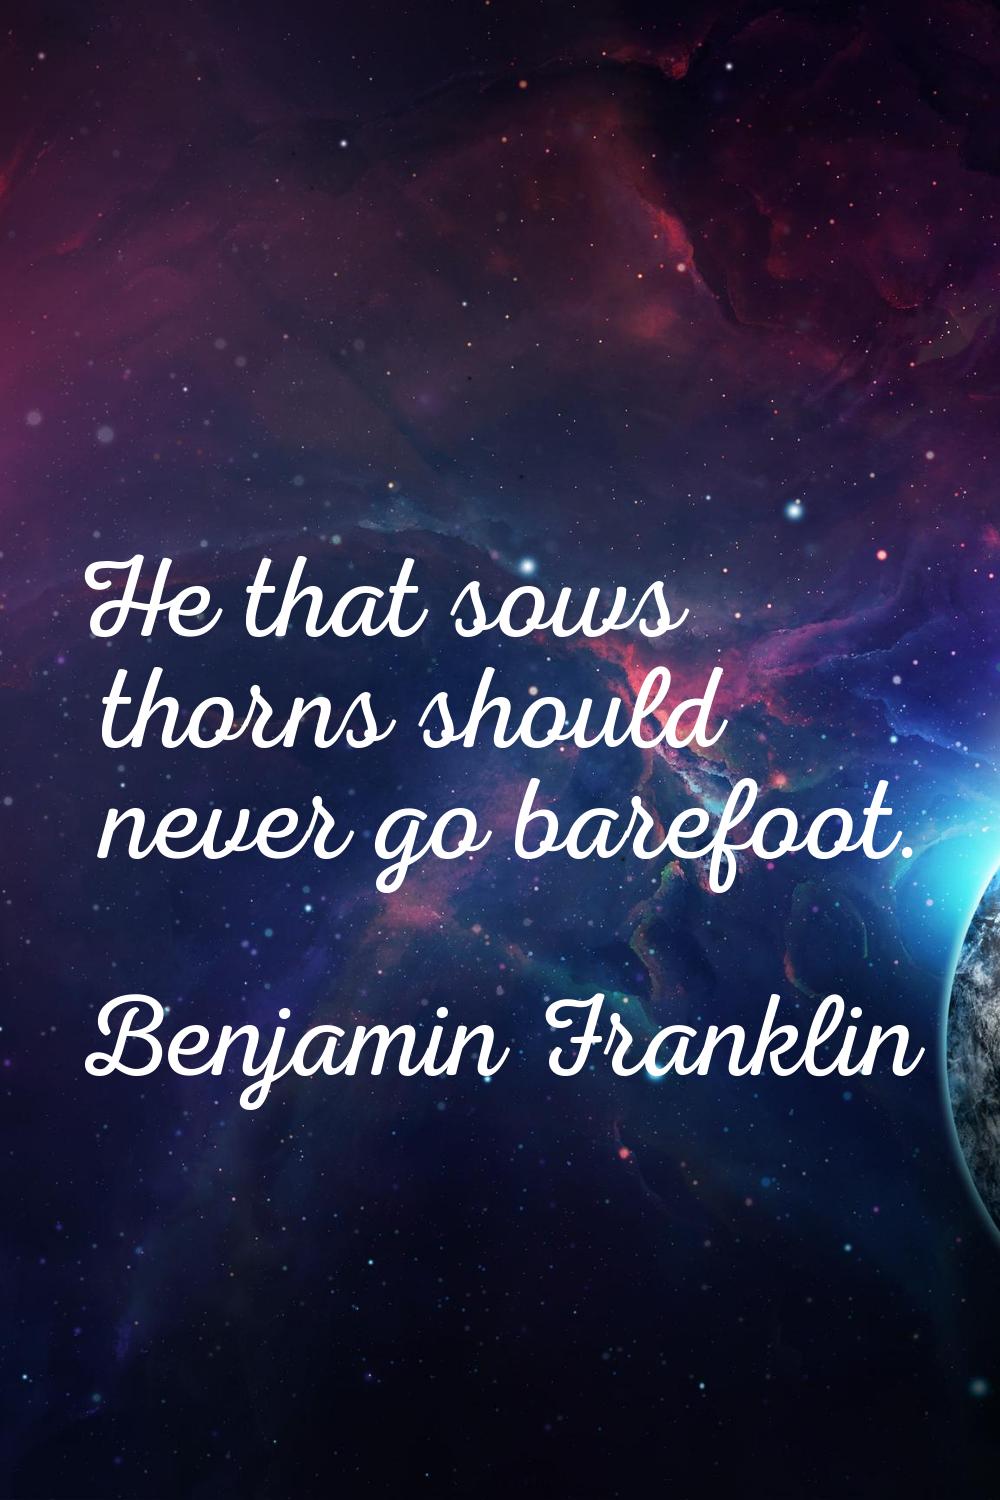 He that sows thorns should never go barefoot.